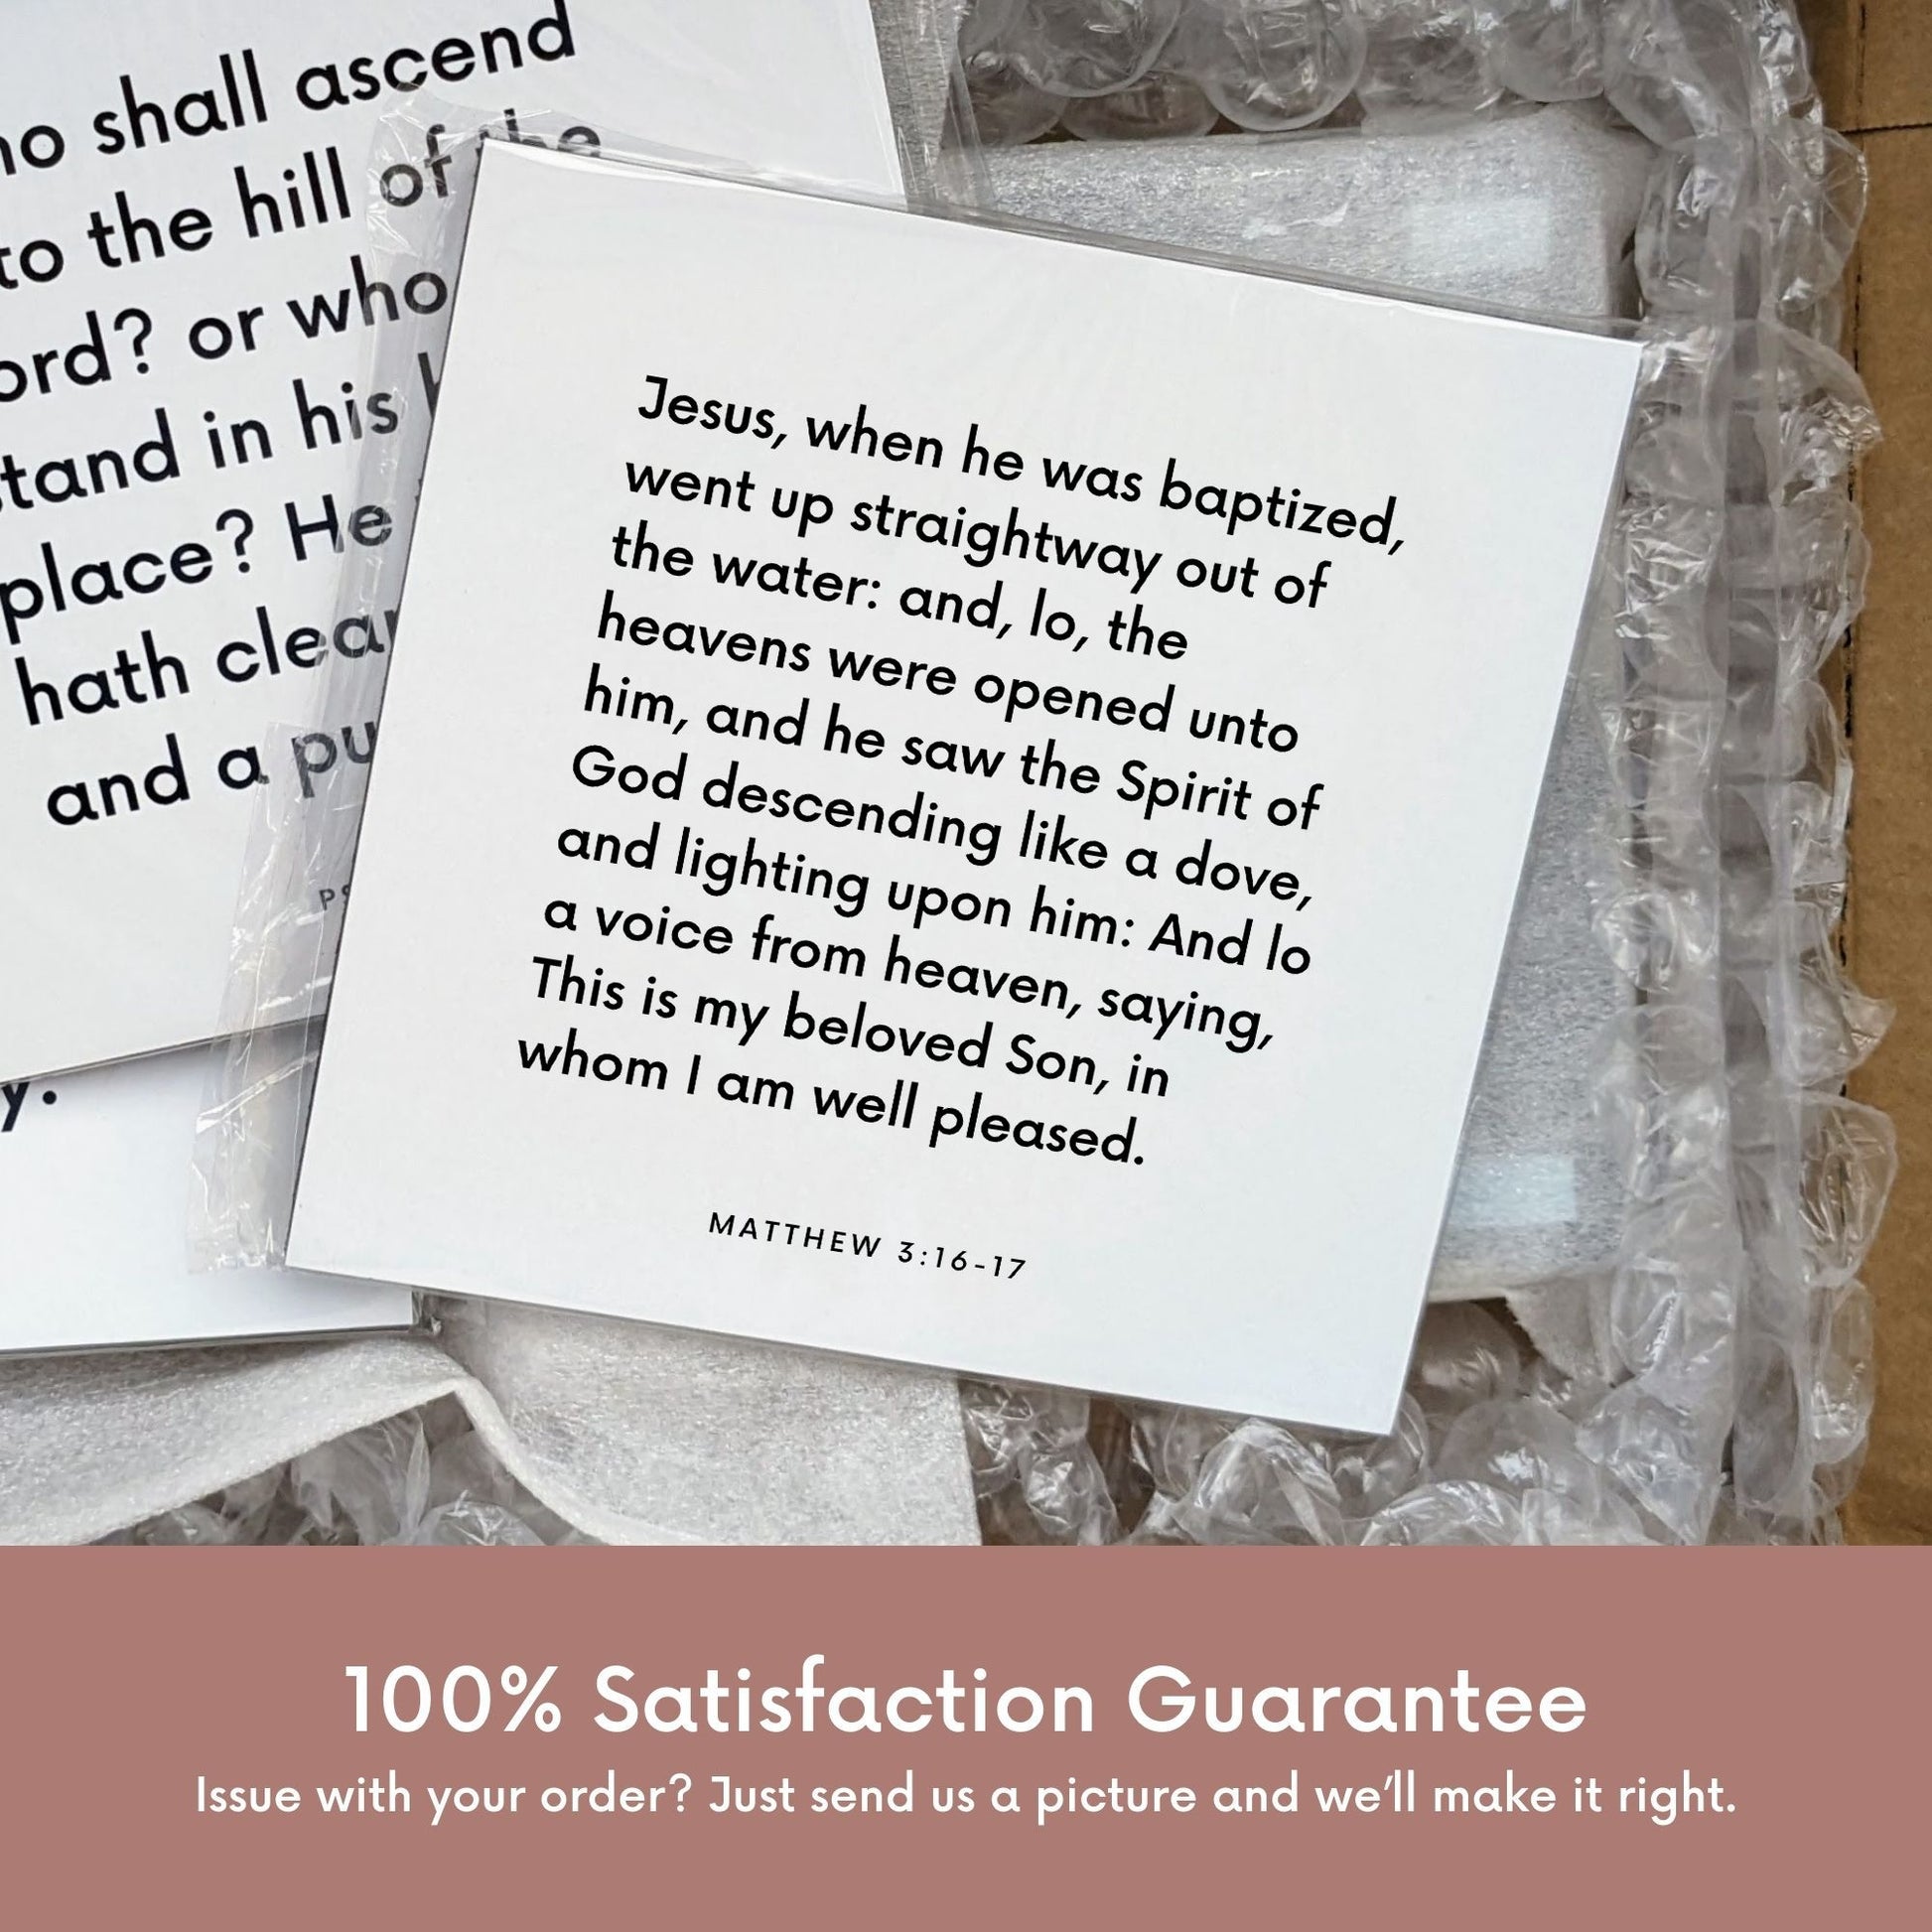 Shipping materials for scripture tile of Matthew 3:16-17 - "This is my beloved Son, in whom I am well pleased"